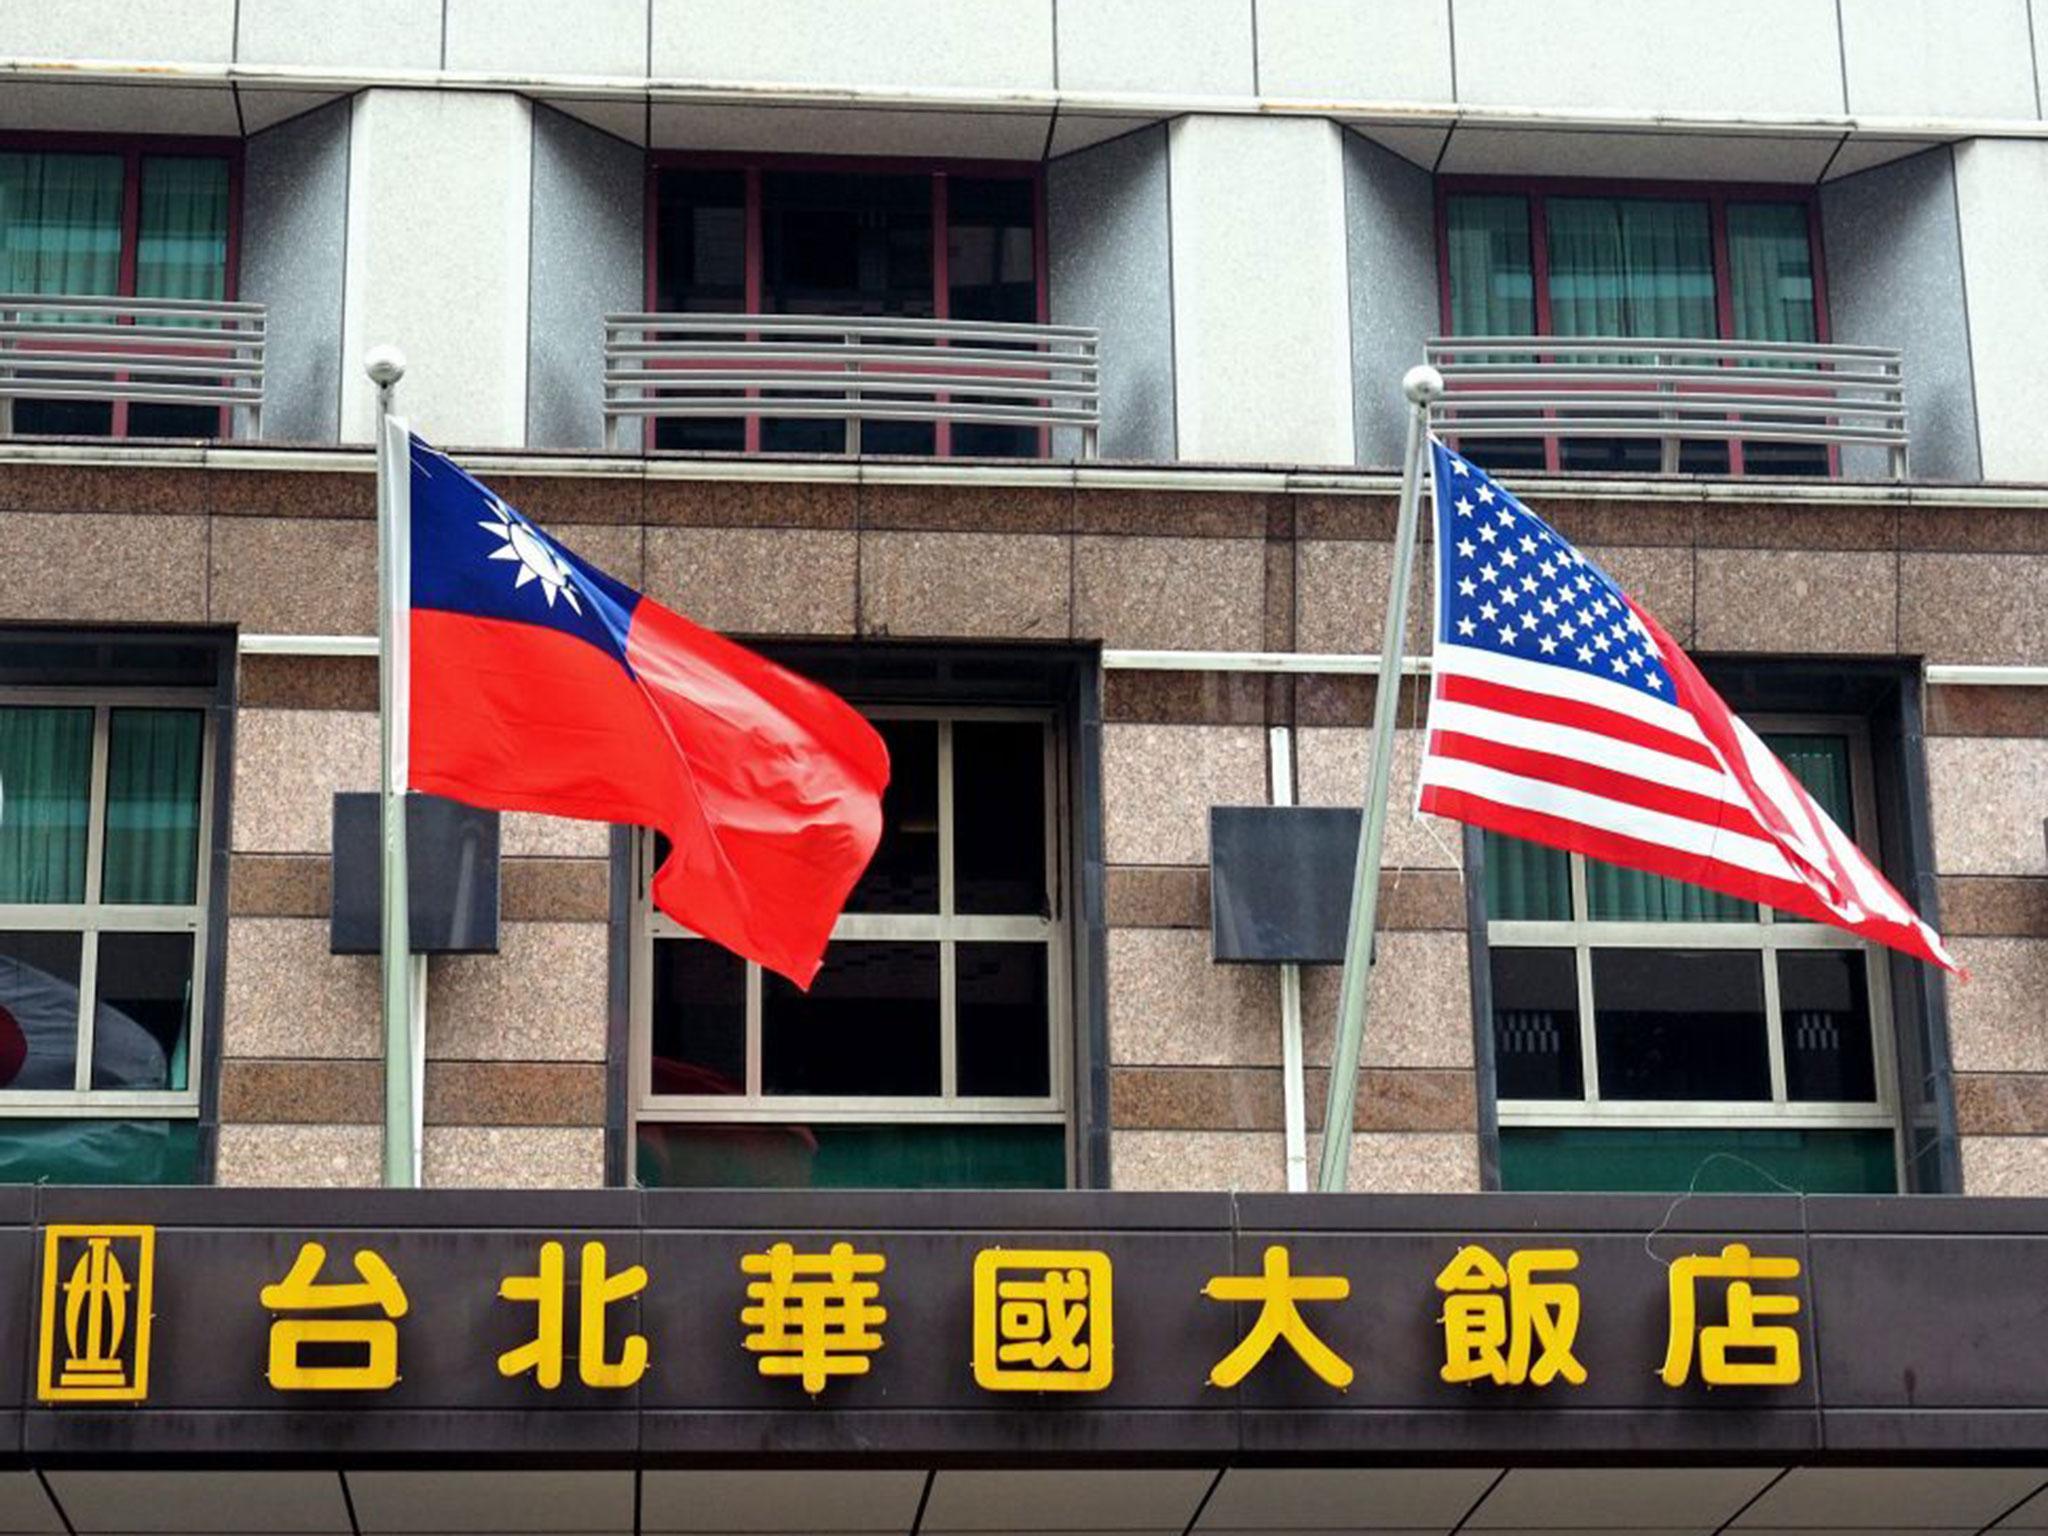 The national flags of Taiwan (L) and the US (R) hanging outside the Imperial Hotel Taipei in Taipei, Taiwan, 14 January 2017. Diplomatic relations between the United States and the Asian region are expected to change as US President-elect Donald Trump has said that the 'One China' policy on Taiwan is up for negotiation under his administration.